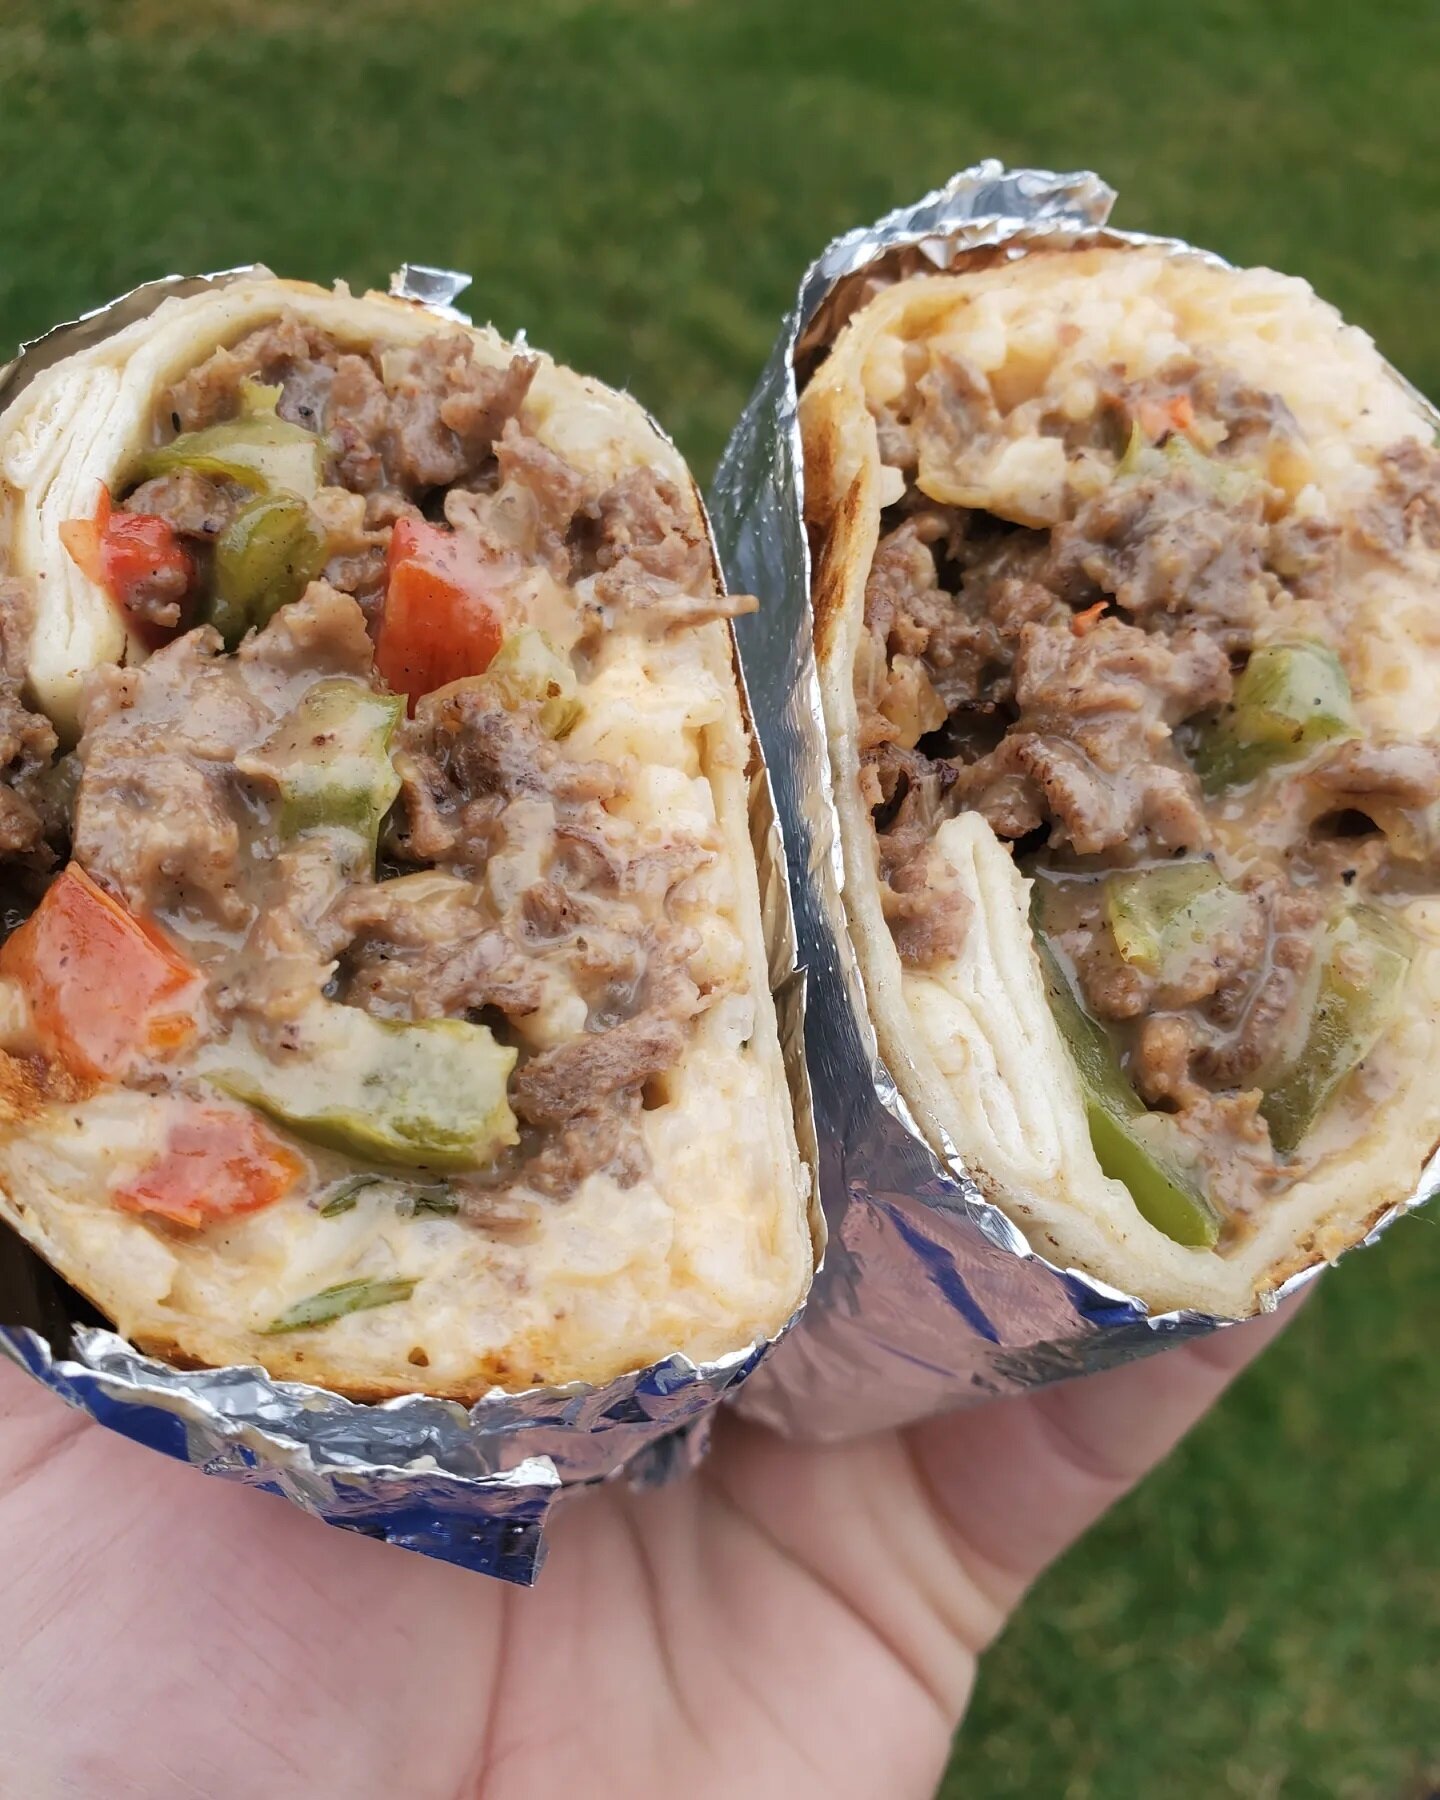 Burrito time!!!!

Get the 1 pound STL Cheesecake Burrito tonight at @9milegarden 7/20 from 5p to 9p.

See ya soon.
#stl #stlfood #stlfoodie #stlfoodies #stlouis #stlouisfood #stlouisfoodie #stlouisfoodies #stlouisfoodscene #stlfoodscene #food #foodtr